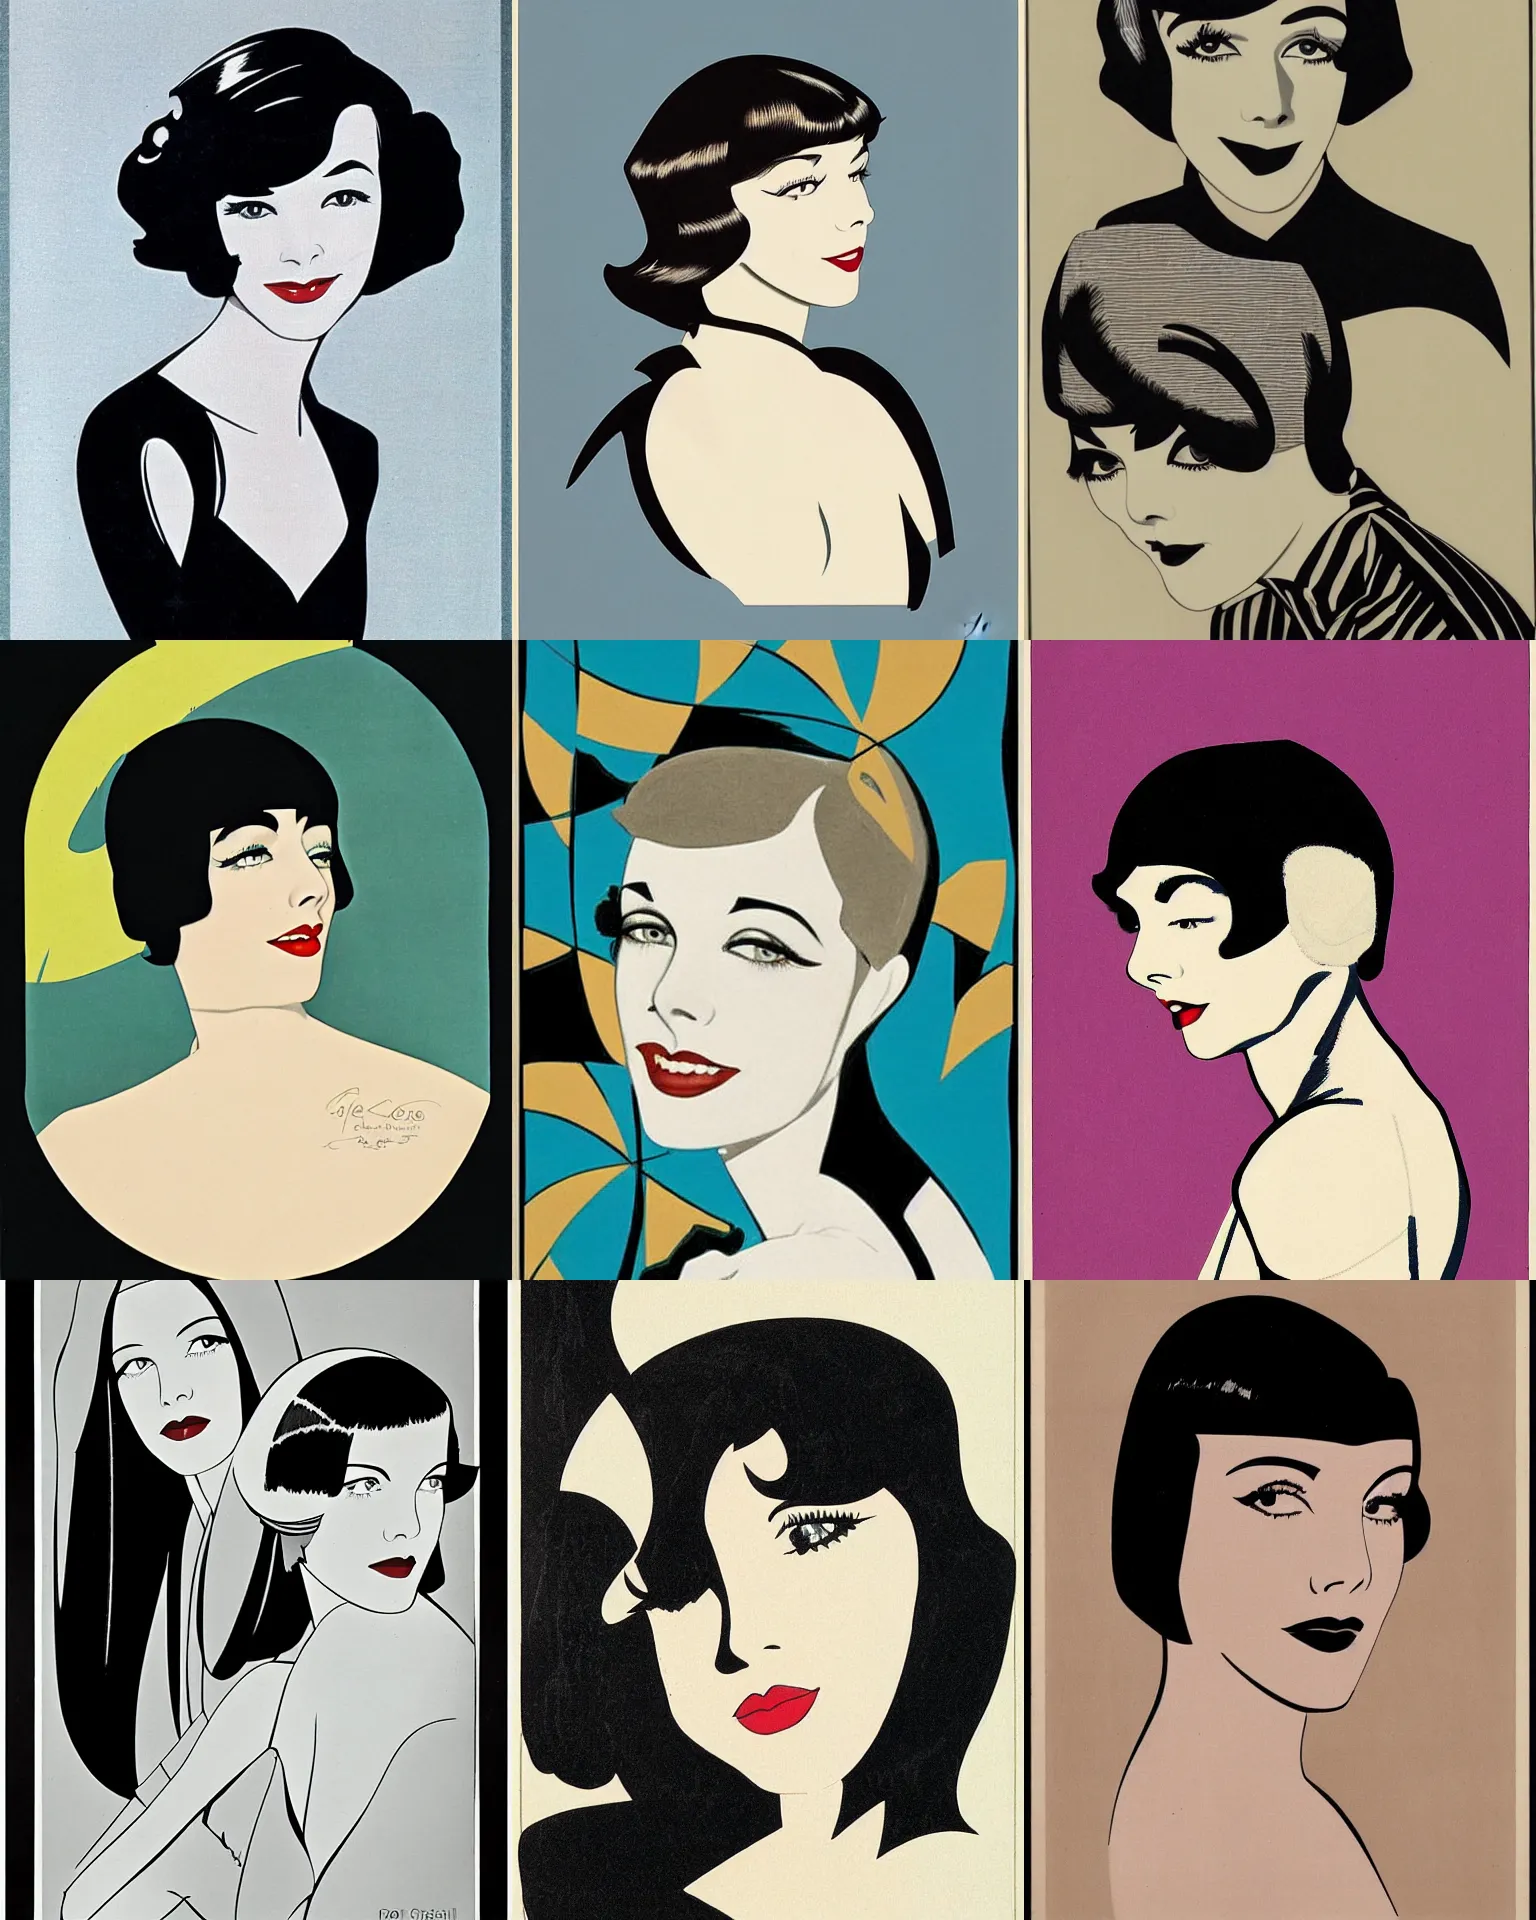 Prompt: Colleen Moore 25 years old, bob haircut, portrait by Patrick Nagel, 1920s, art deco